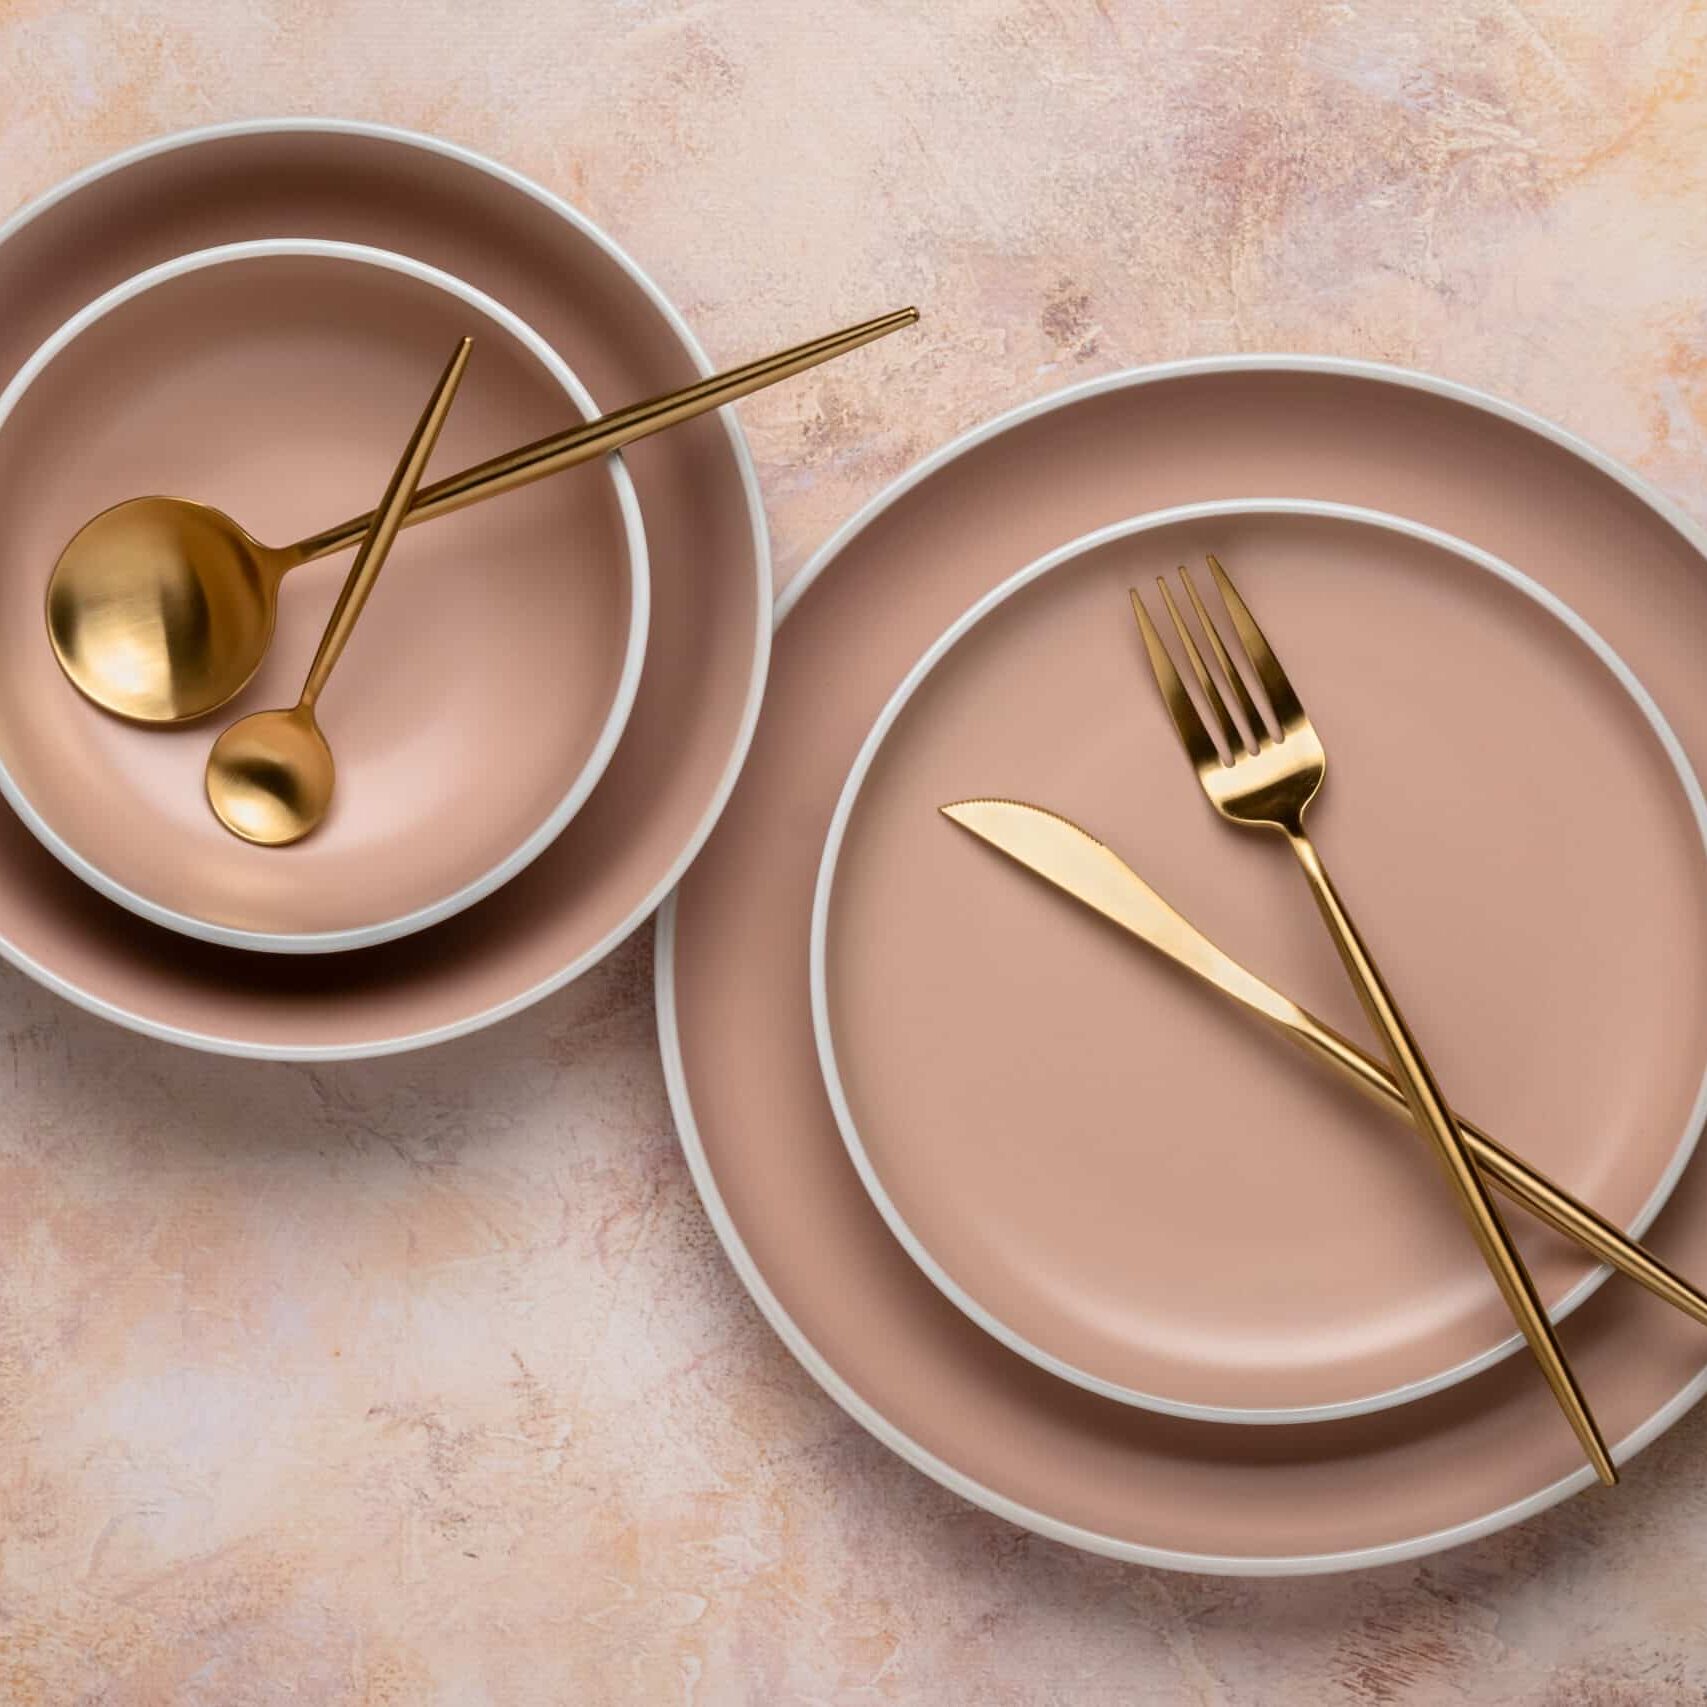 Collection of round beige plates of different sizes on the table, top view. Golden cutlery and crockery for serving and eating. Modern craft ceramic tableware, trendy tableware